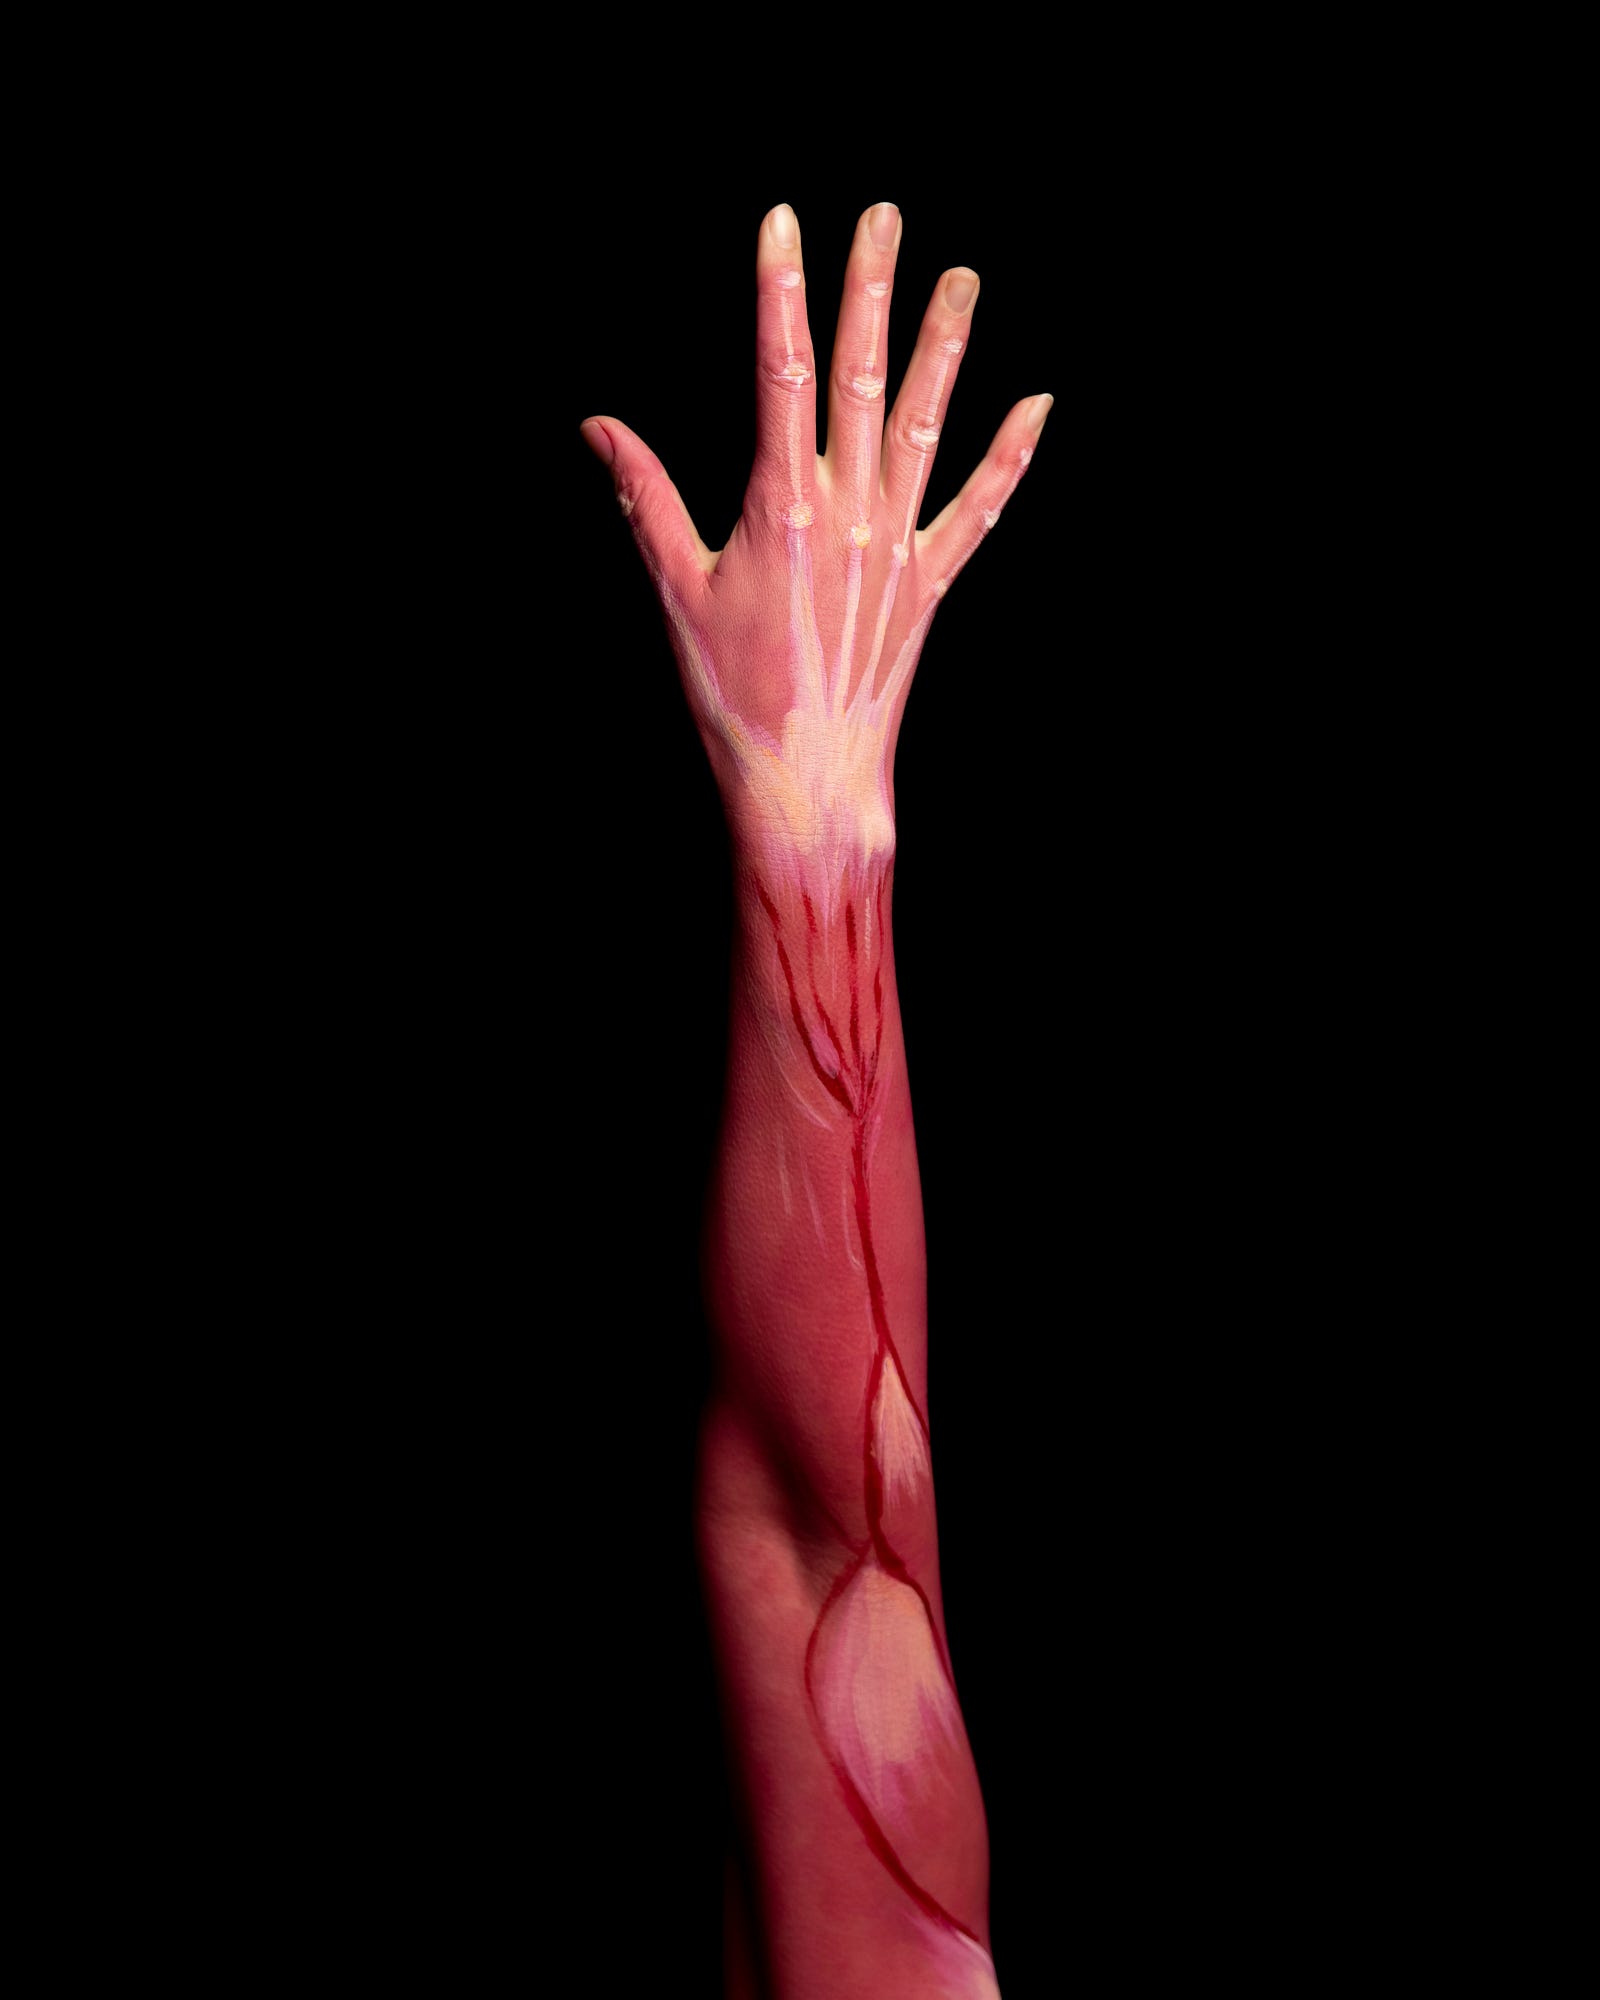 A skinless arm (model) is raised, muscles and arteries exposed.